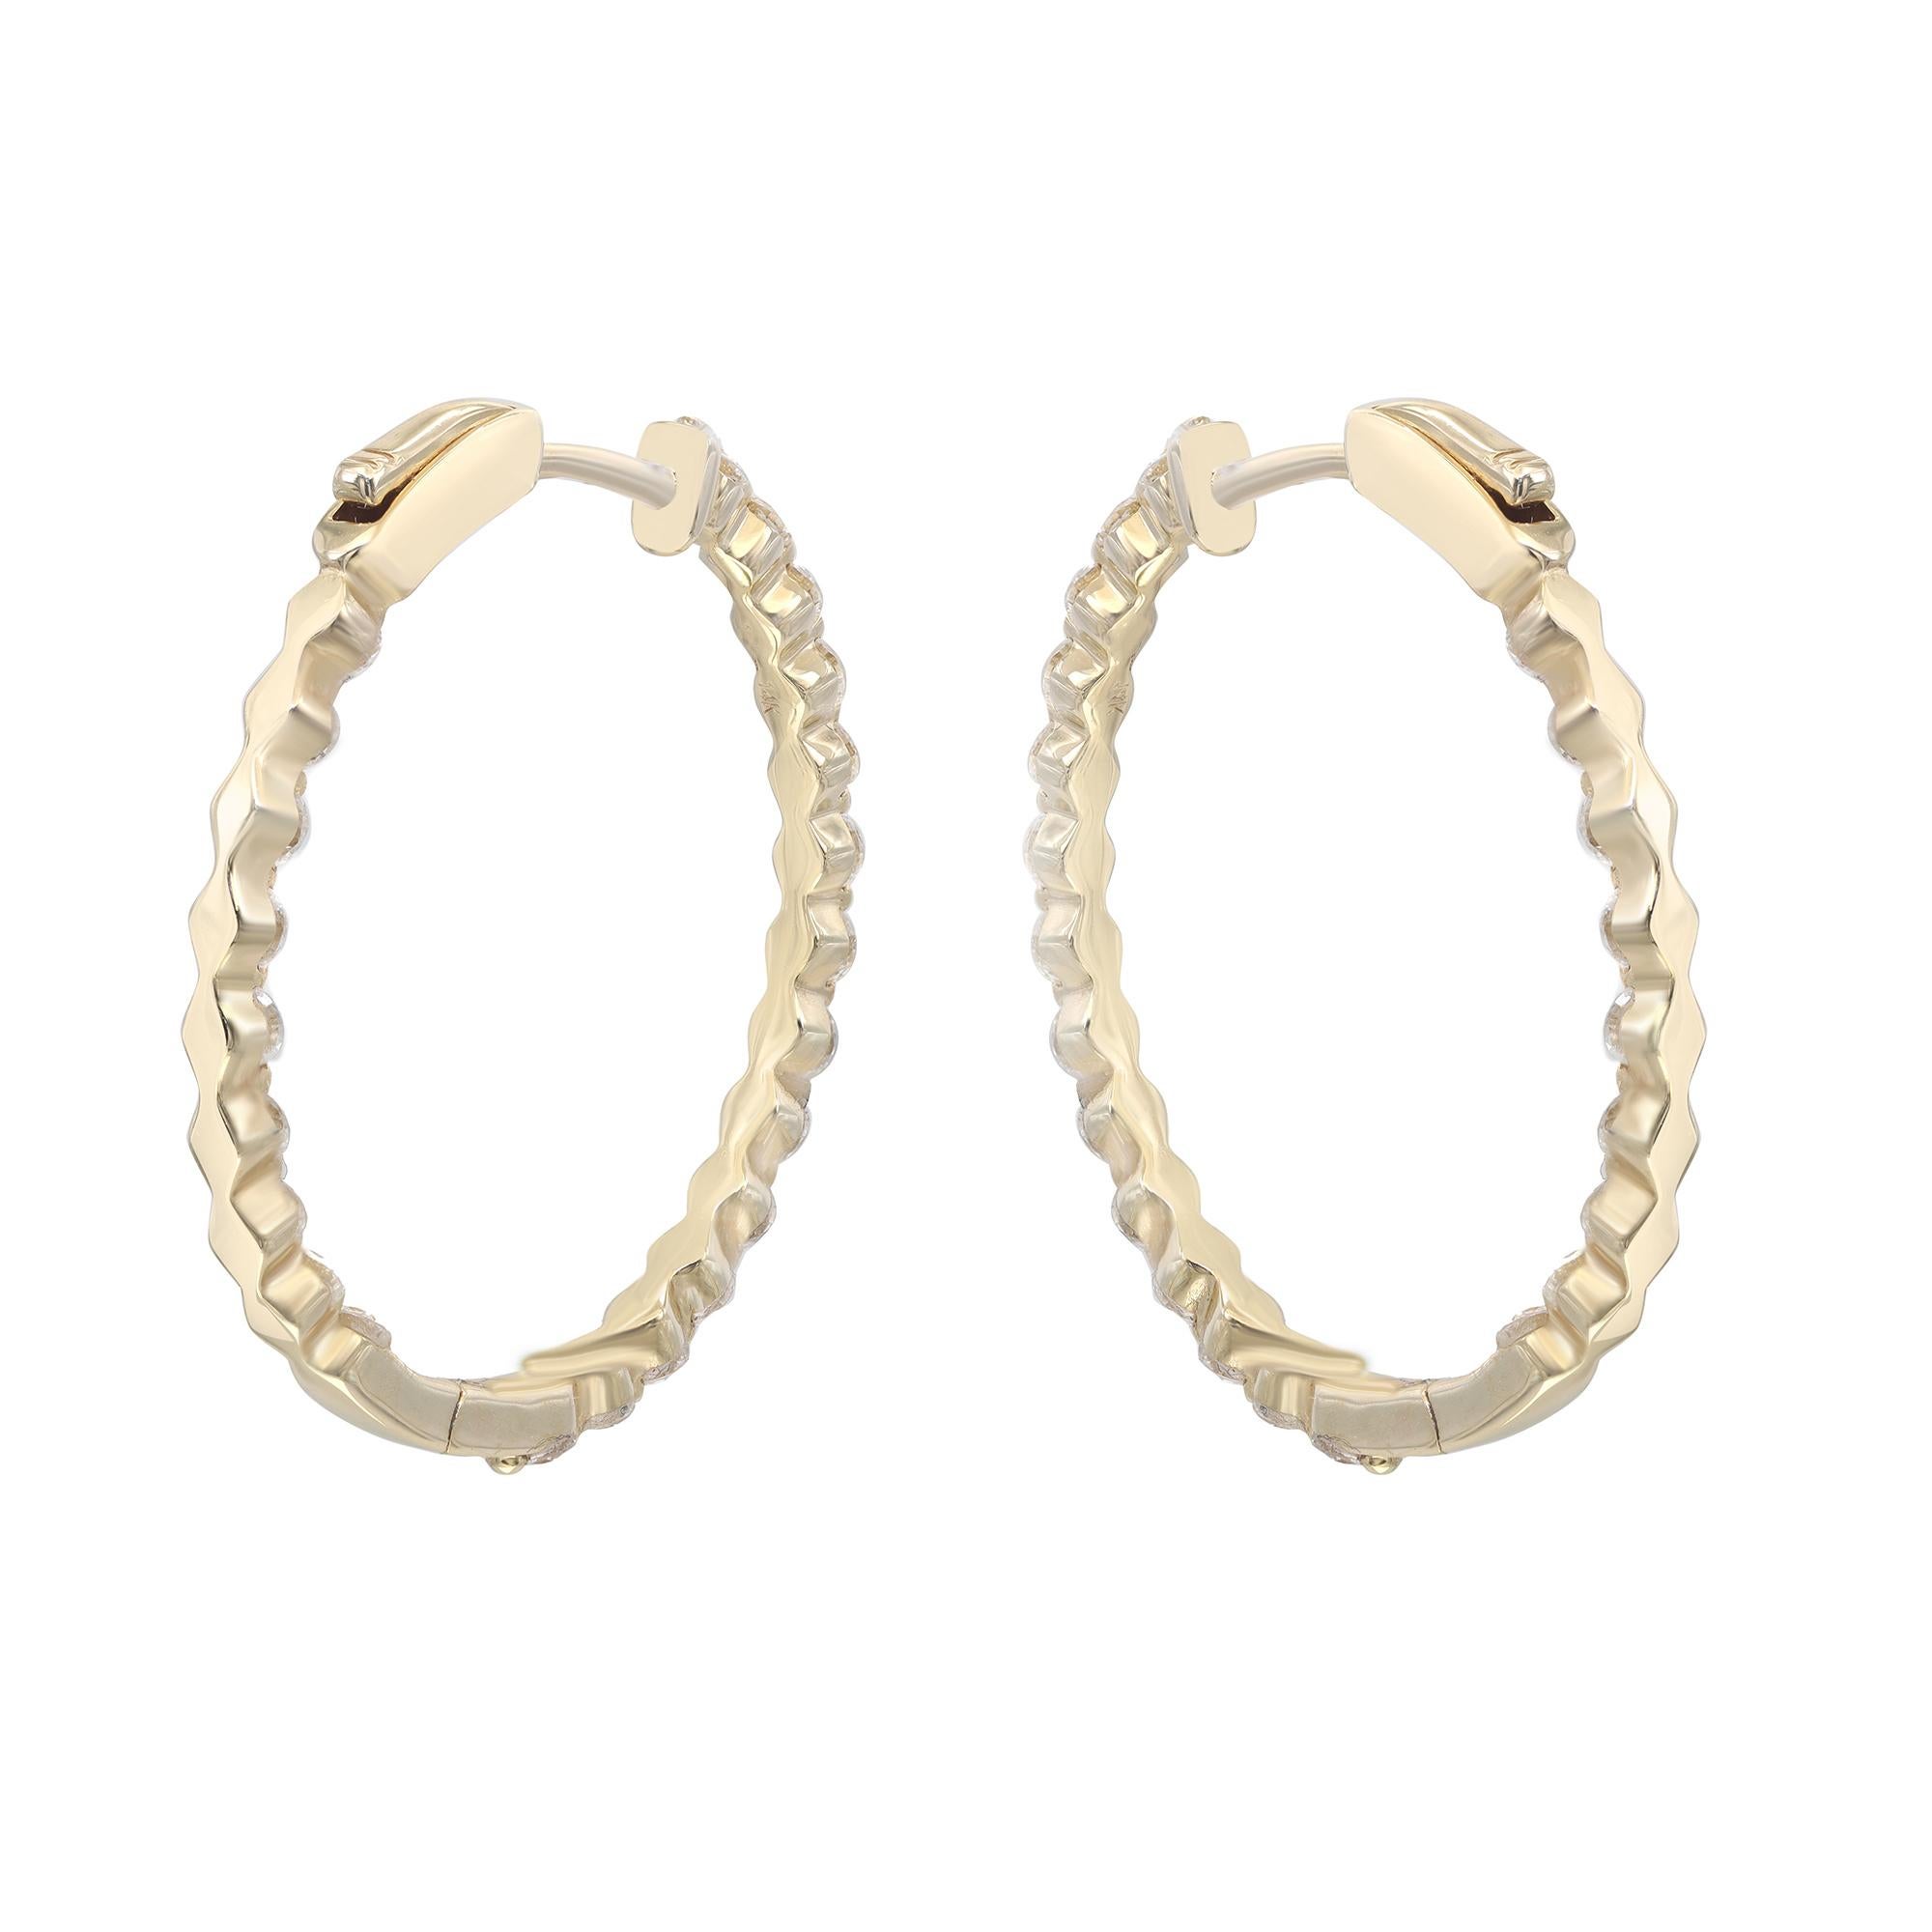 Sparkle all way with these beautiful diamond hoop earrings. Crafted in 14K yellow gold. These hoop earrings are lined with single shared prong set round brilliant cut diamonds weighing 1.43Cttw. The stones line only half of the outer hoop and half